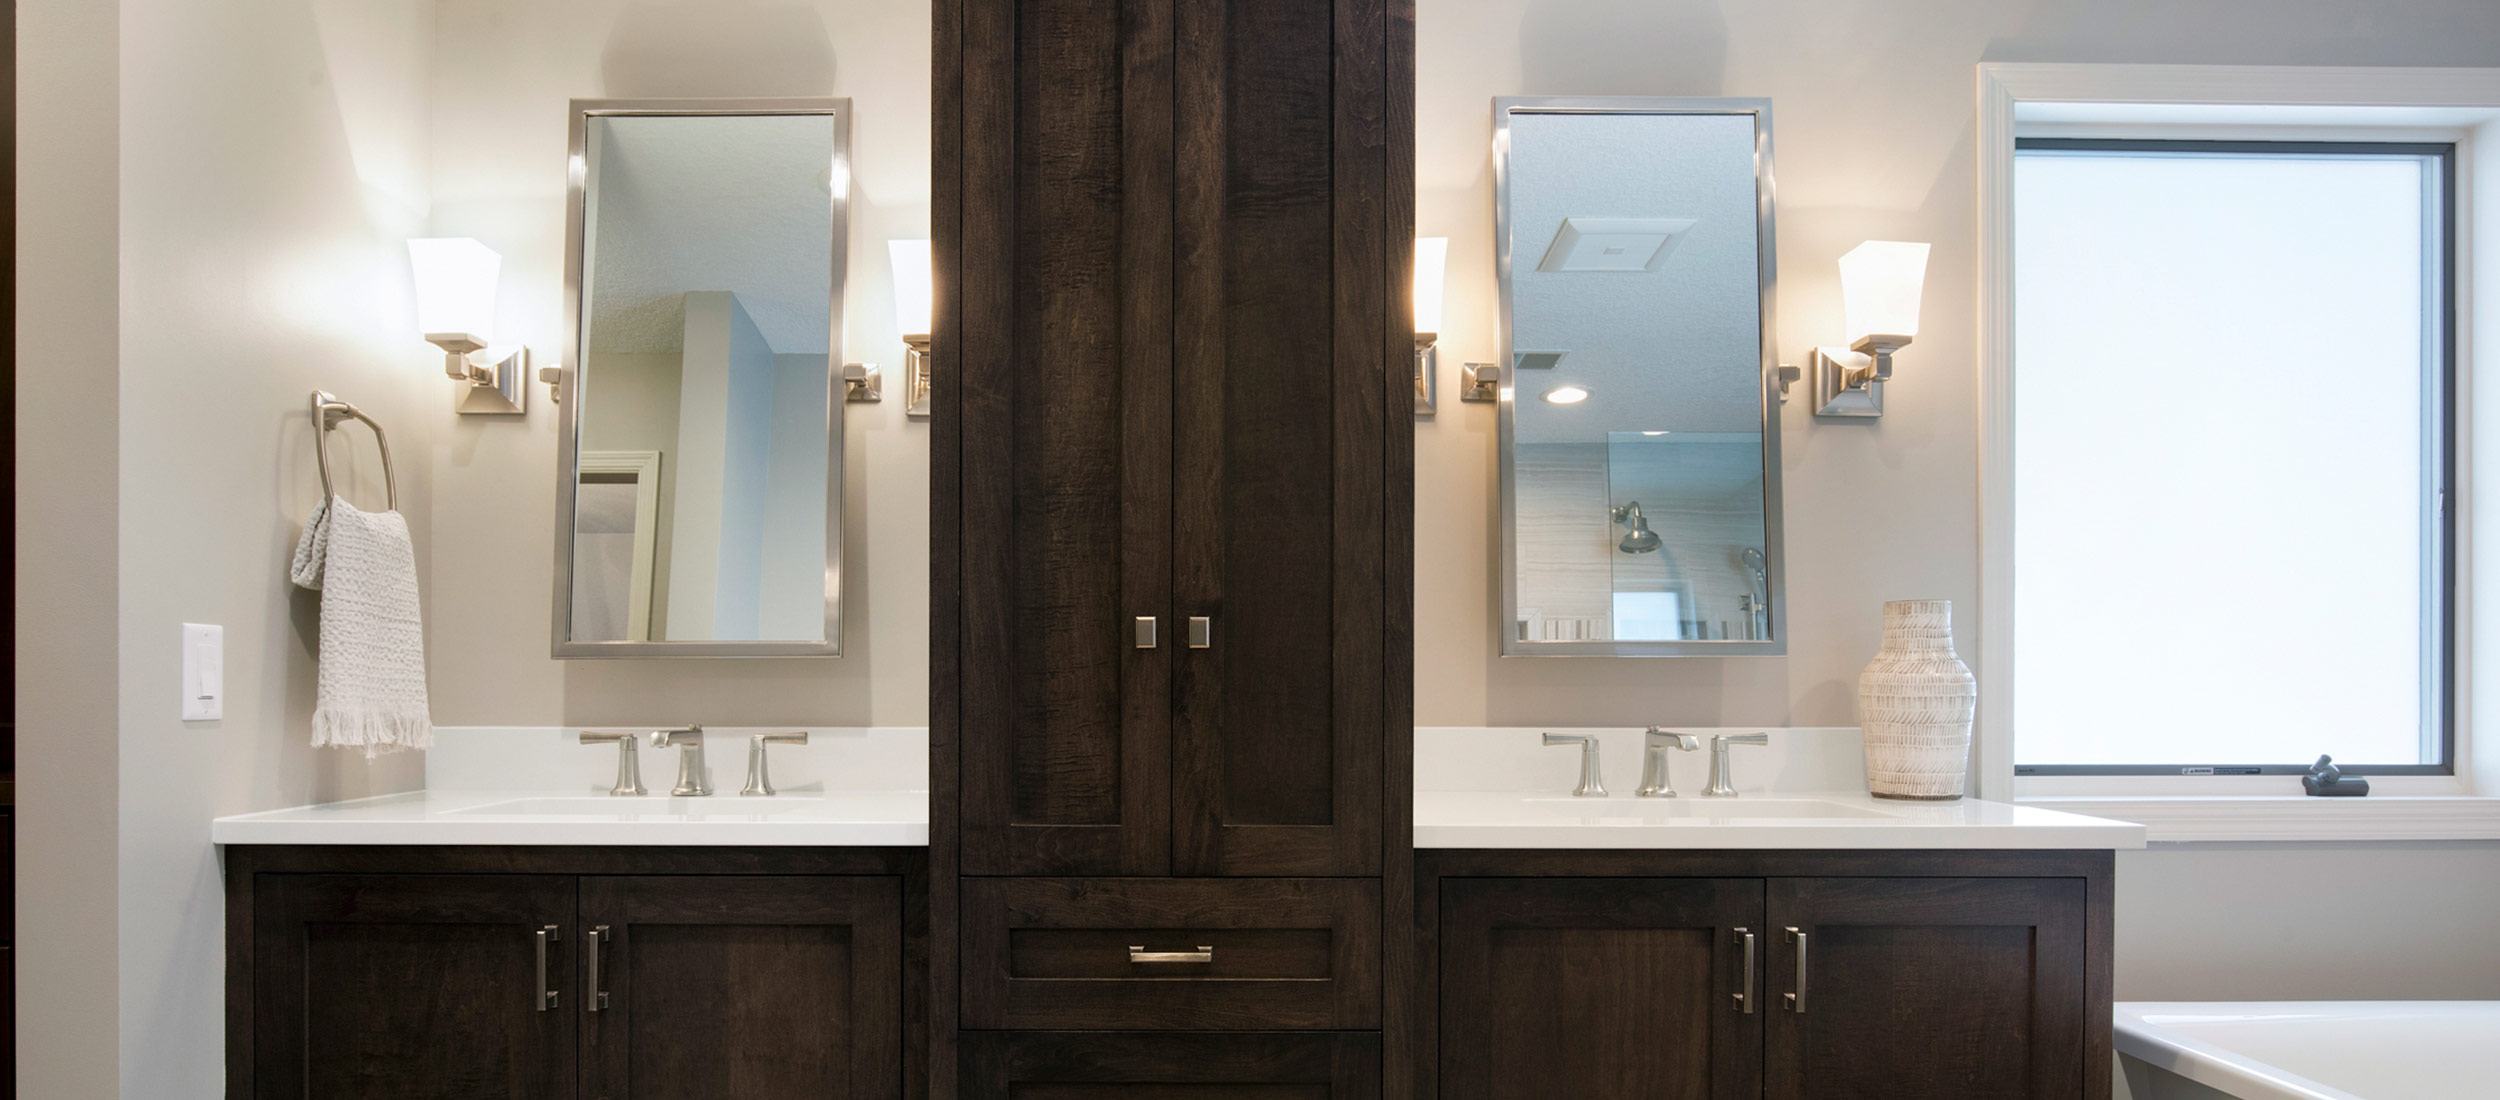 Master bathroom remodel with dark cabinets and stainless steel hardware